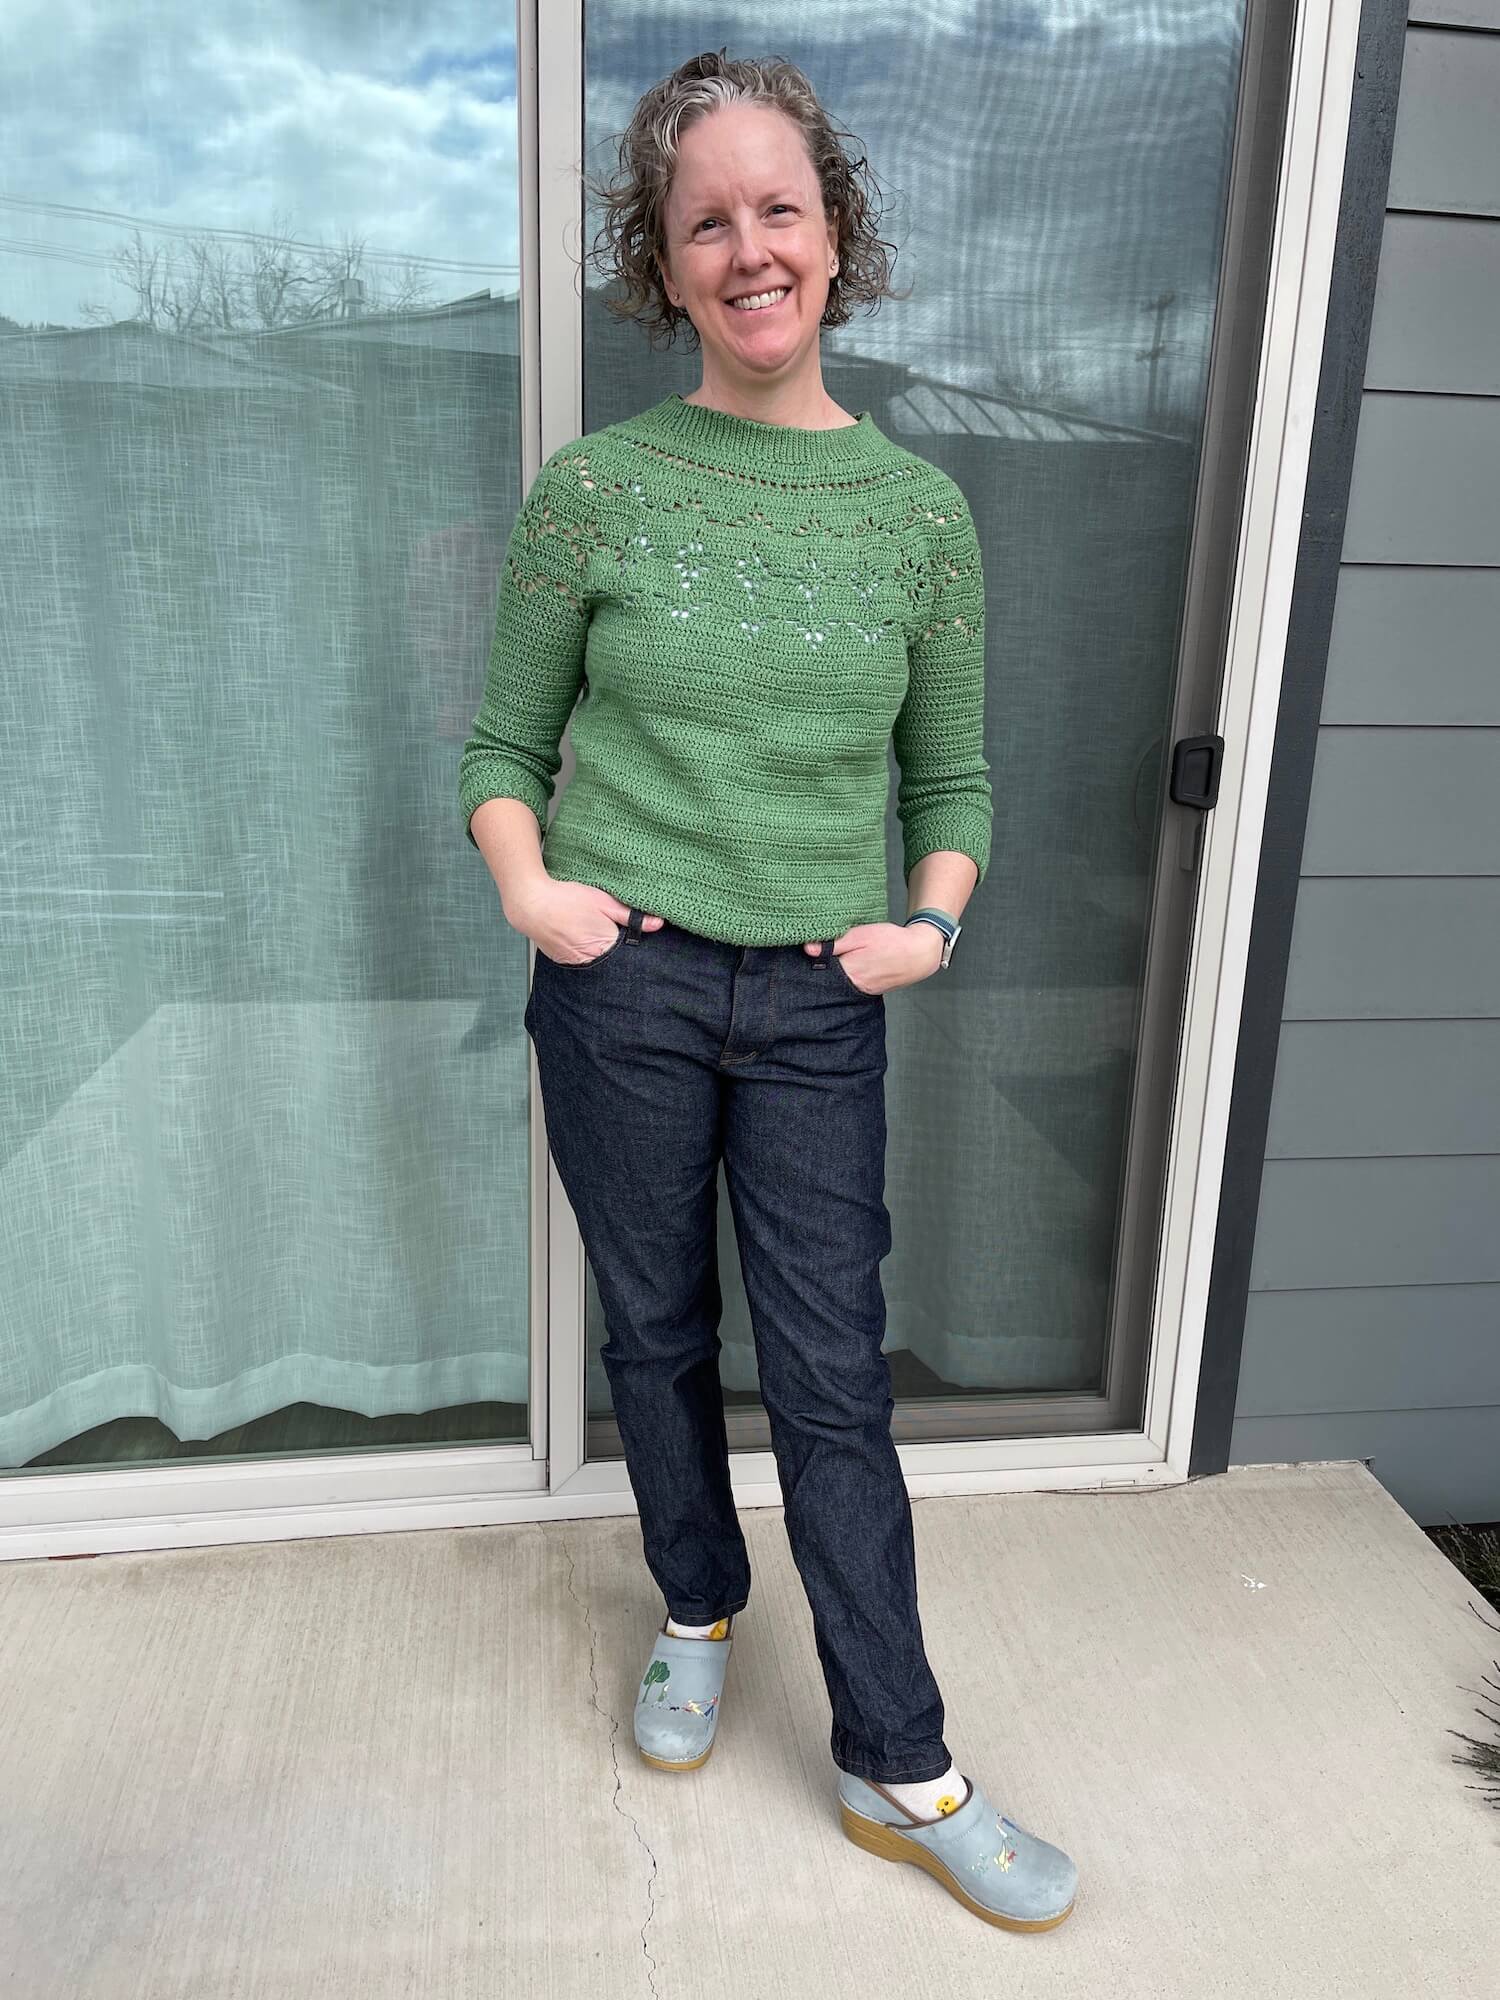 Me, in a green crochet sweater, my hands in the pockets of my jeans, standing in front of a large slider window with my left leg out and my head slightly tilted, wearing dark denim jeans.